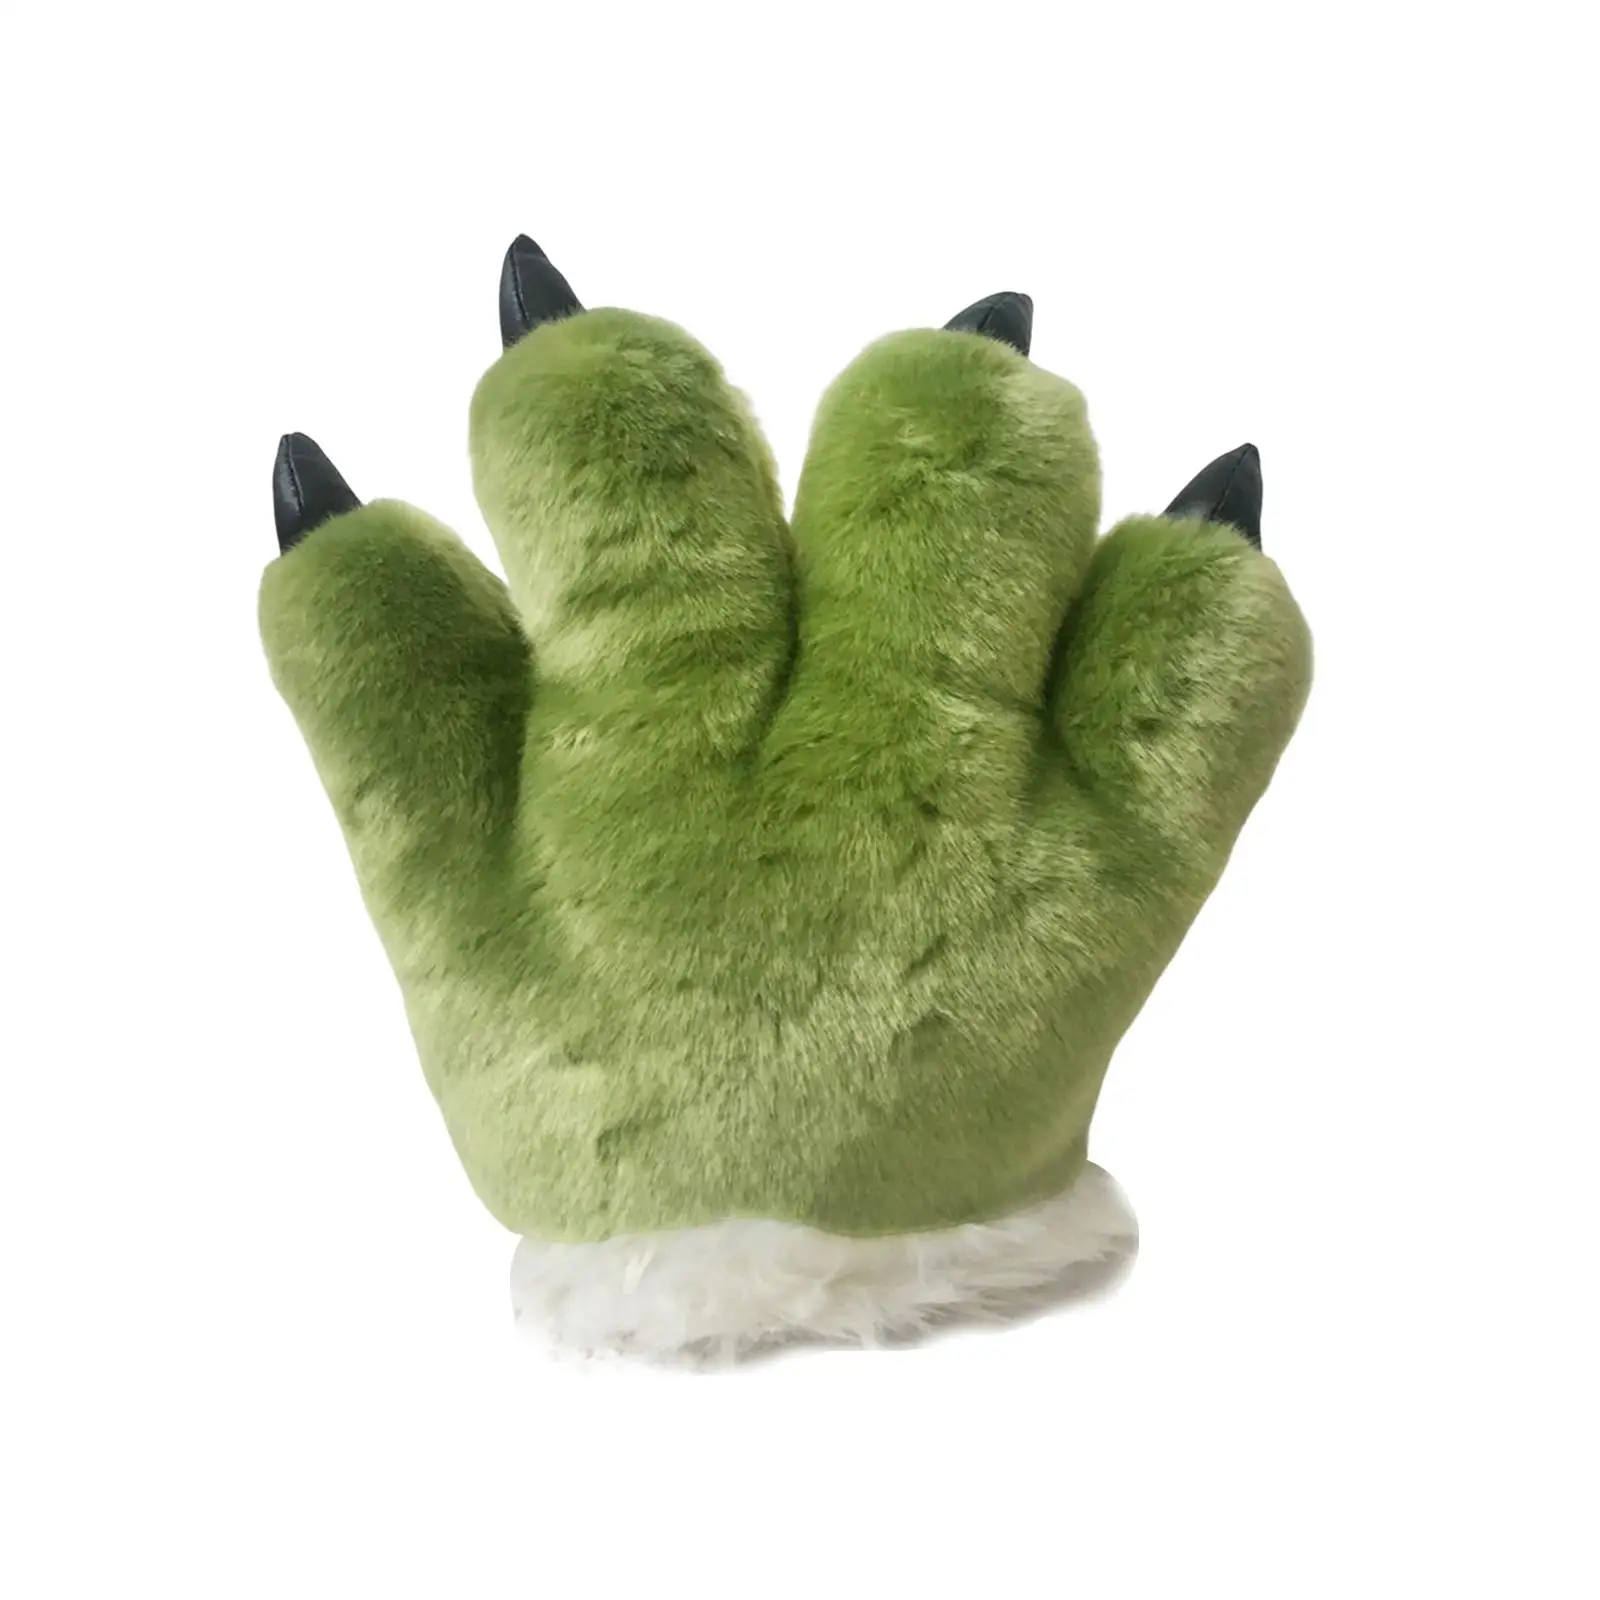 Animals Palm Paw Glove Toy Plush Halloween Cosplay Costume Bright Color Claw Mitten